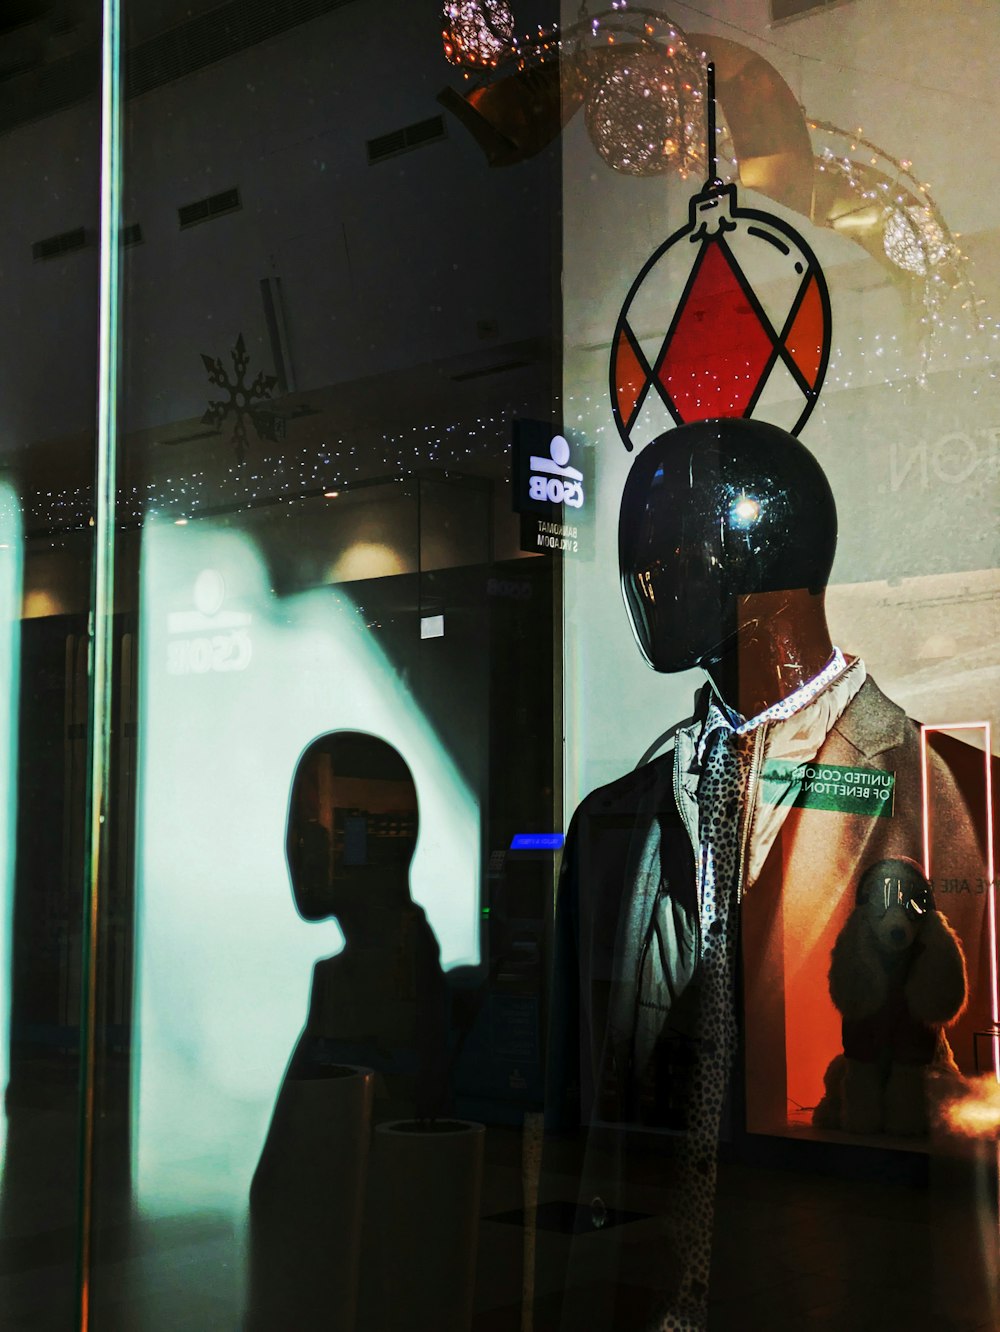 a mannequin wearing a suit and tie in front of a window